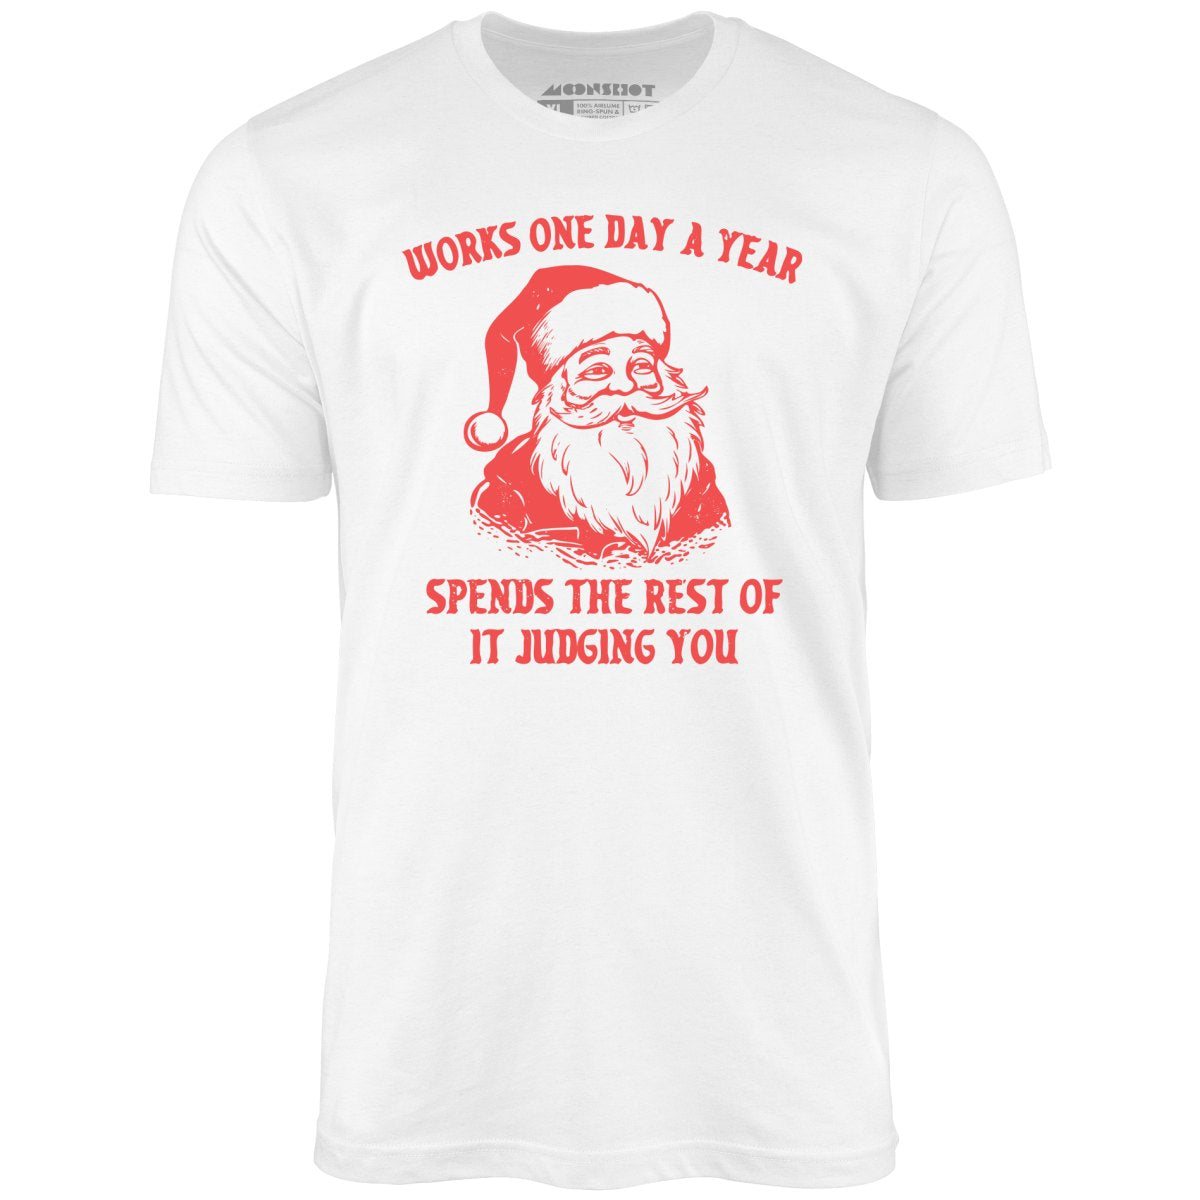 Works One Day a Year - Unisex T-Shirt